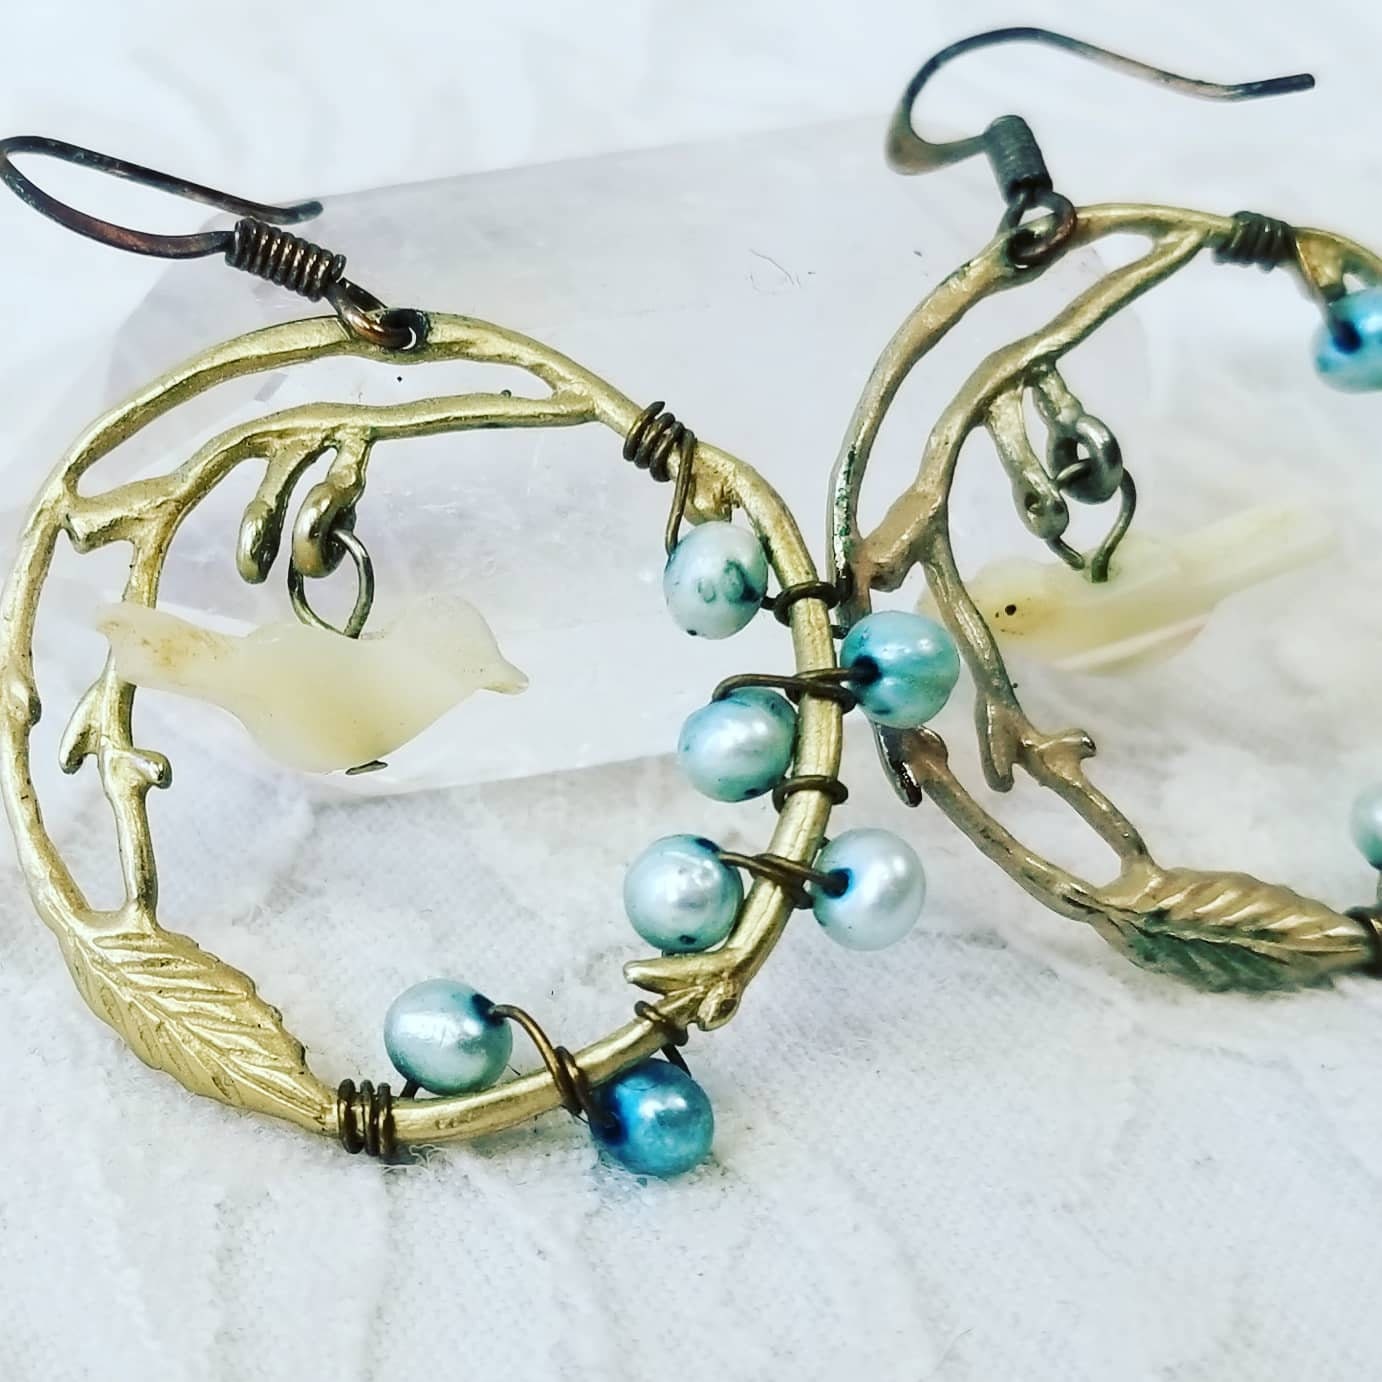 Handmade Blue Pearl Beads on Brass Twig Earrings with Mother of Pearl Birds